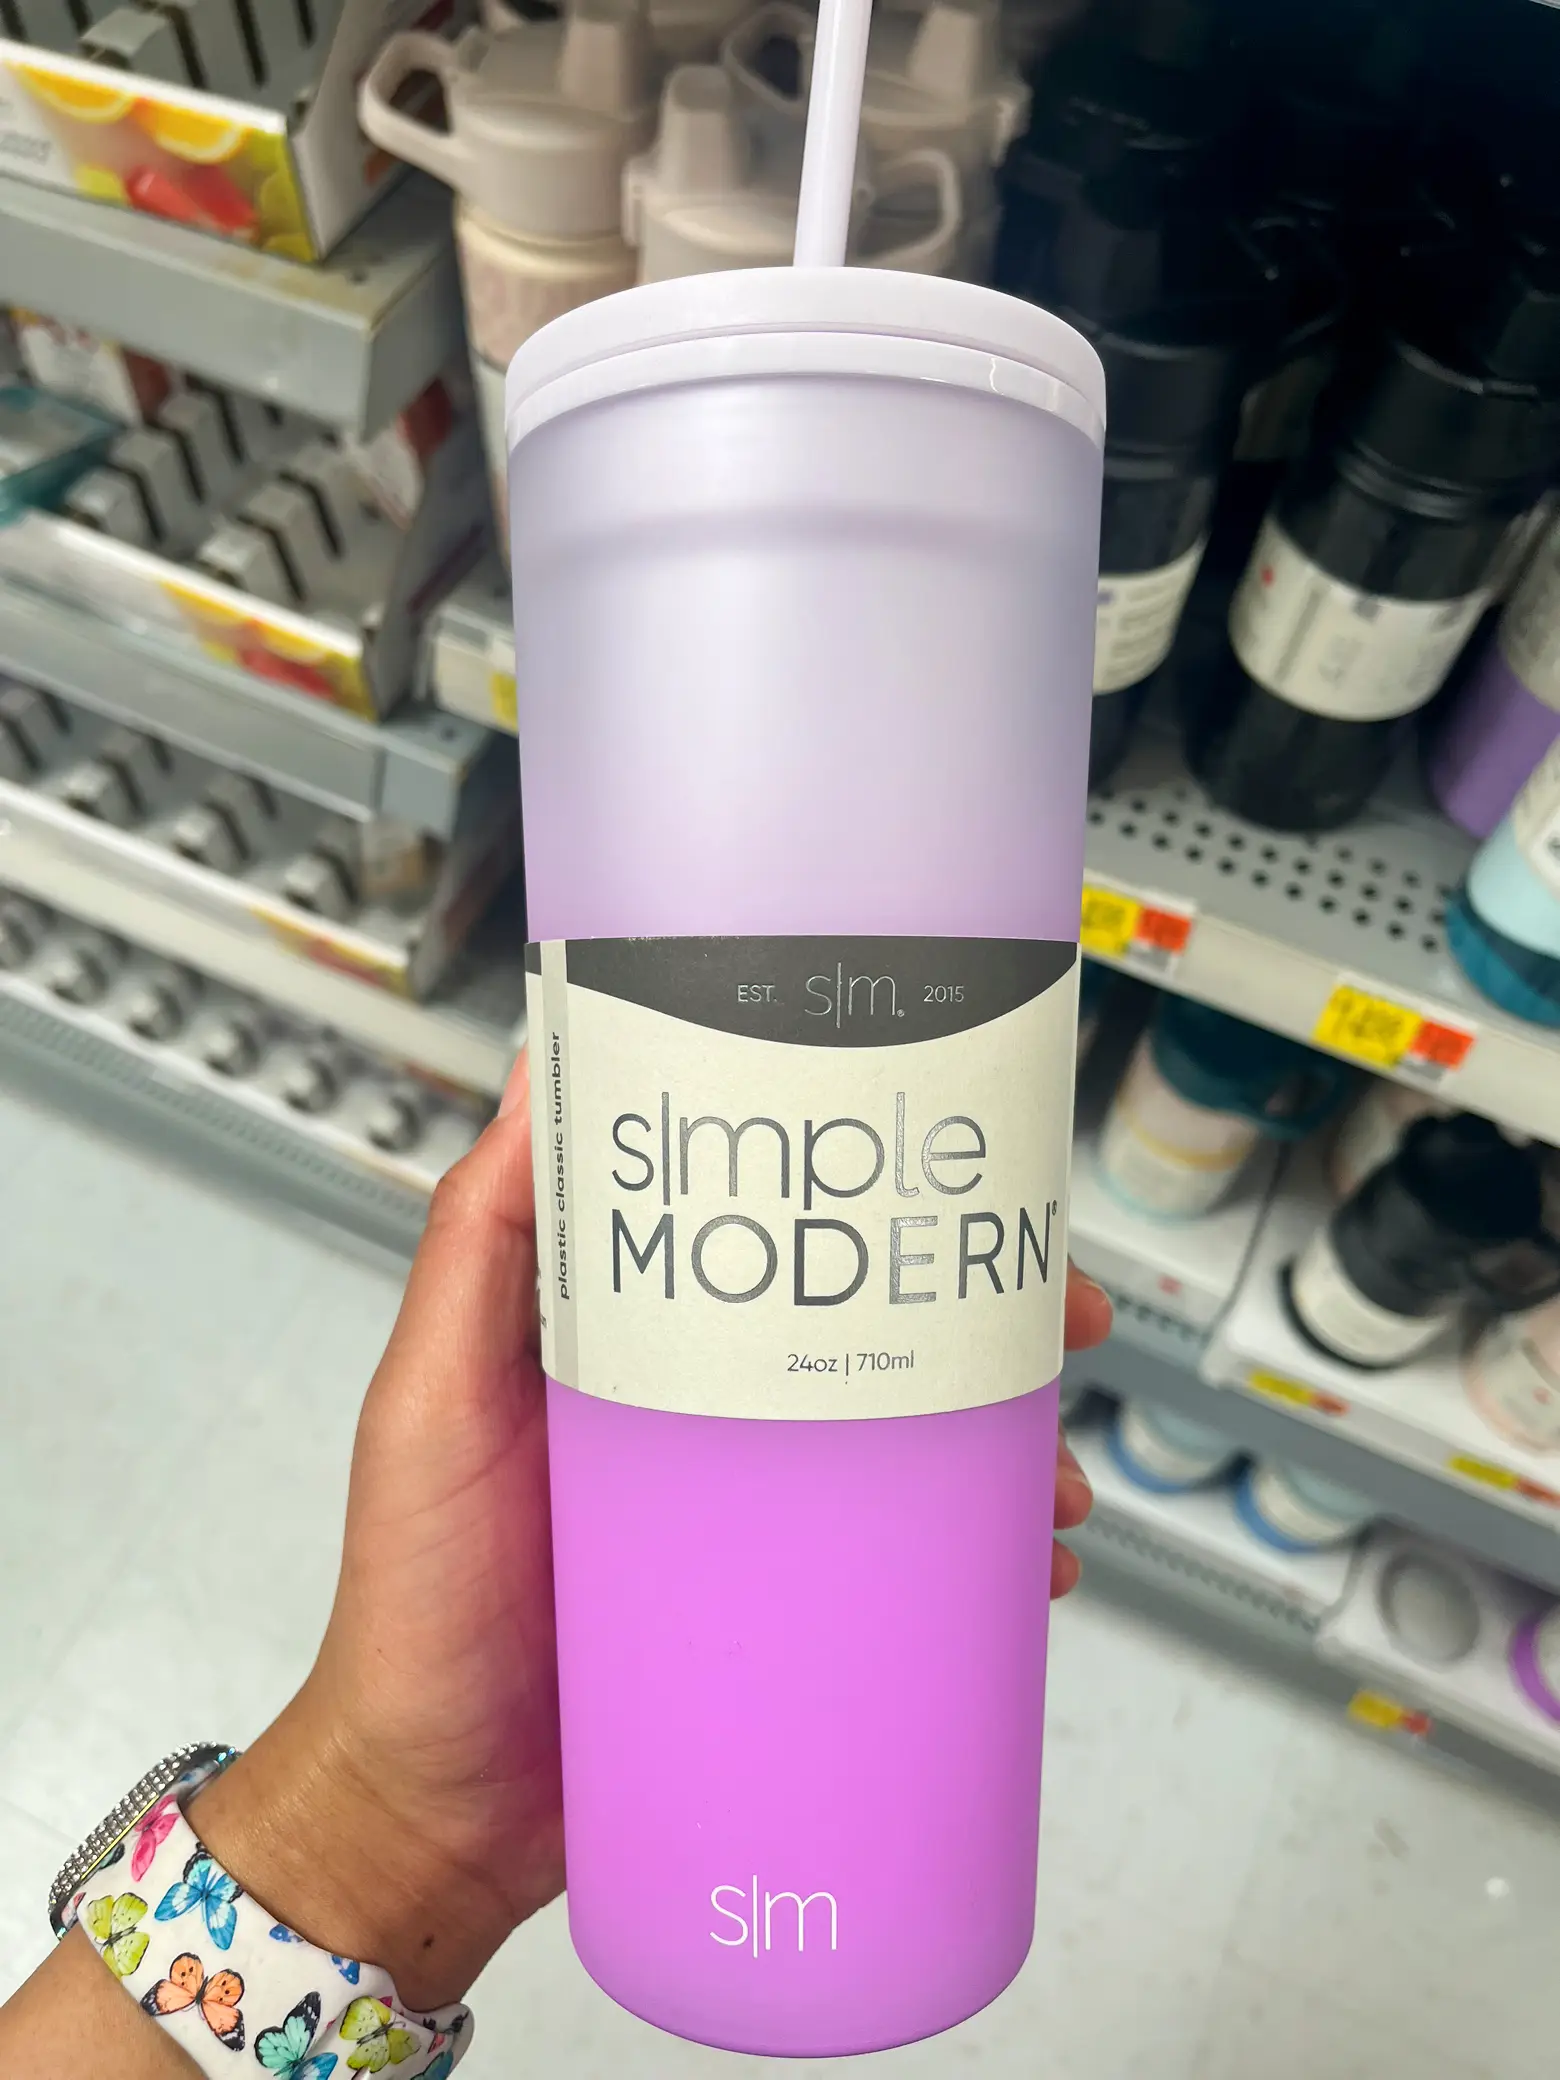 SIMPLE MODERN TUMBLERS AT WALMART 😍, Gallery posted by Belle ⚜️